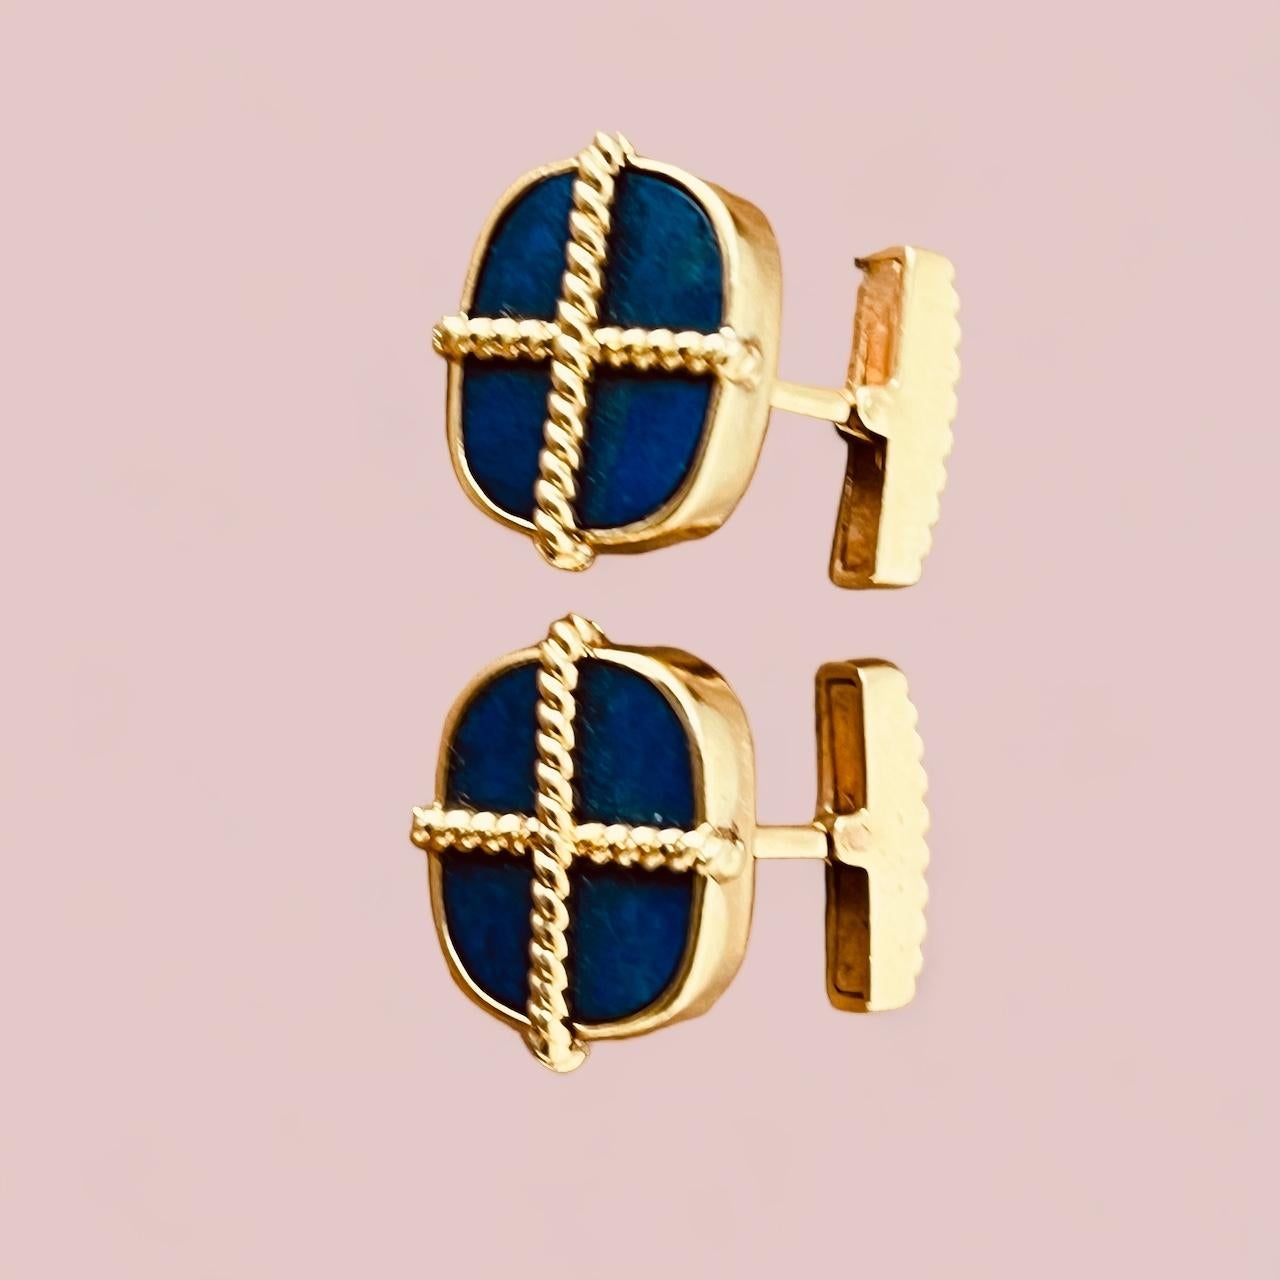 A Pair of 18ct Yellow Gold and Lapis Lazuli Cufflinks. Circa 1970's. For Sale 13